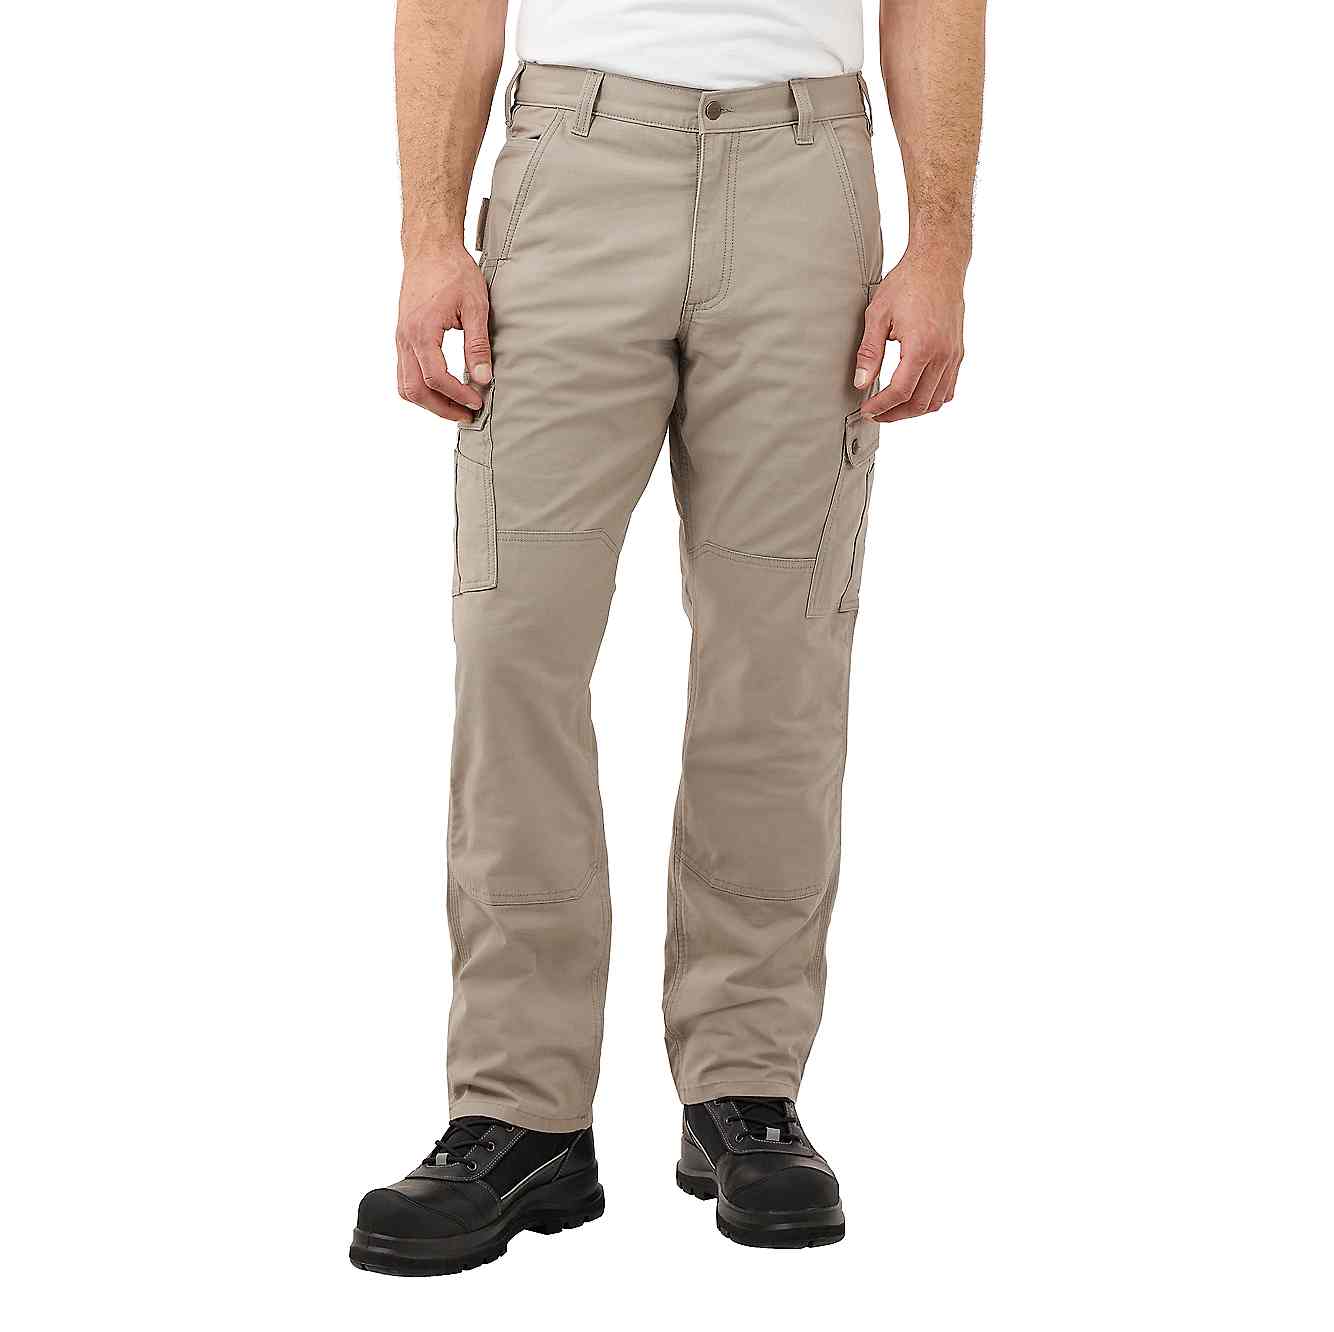 RUGGED FLEX RELAXED FIT RIPSTOP CARGO WORK PANT | Carhartt®